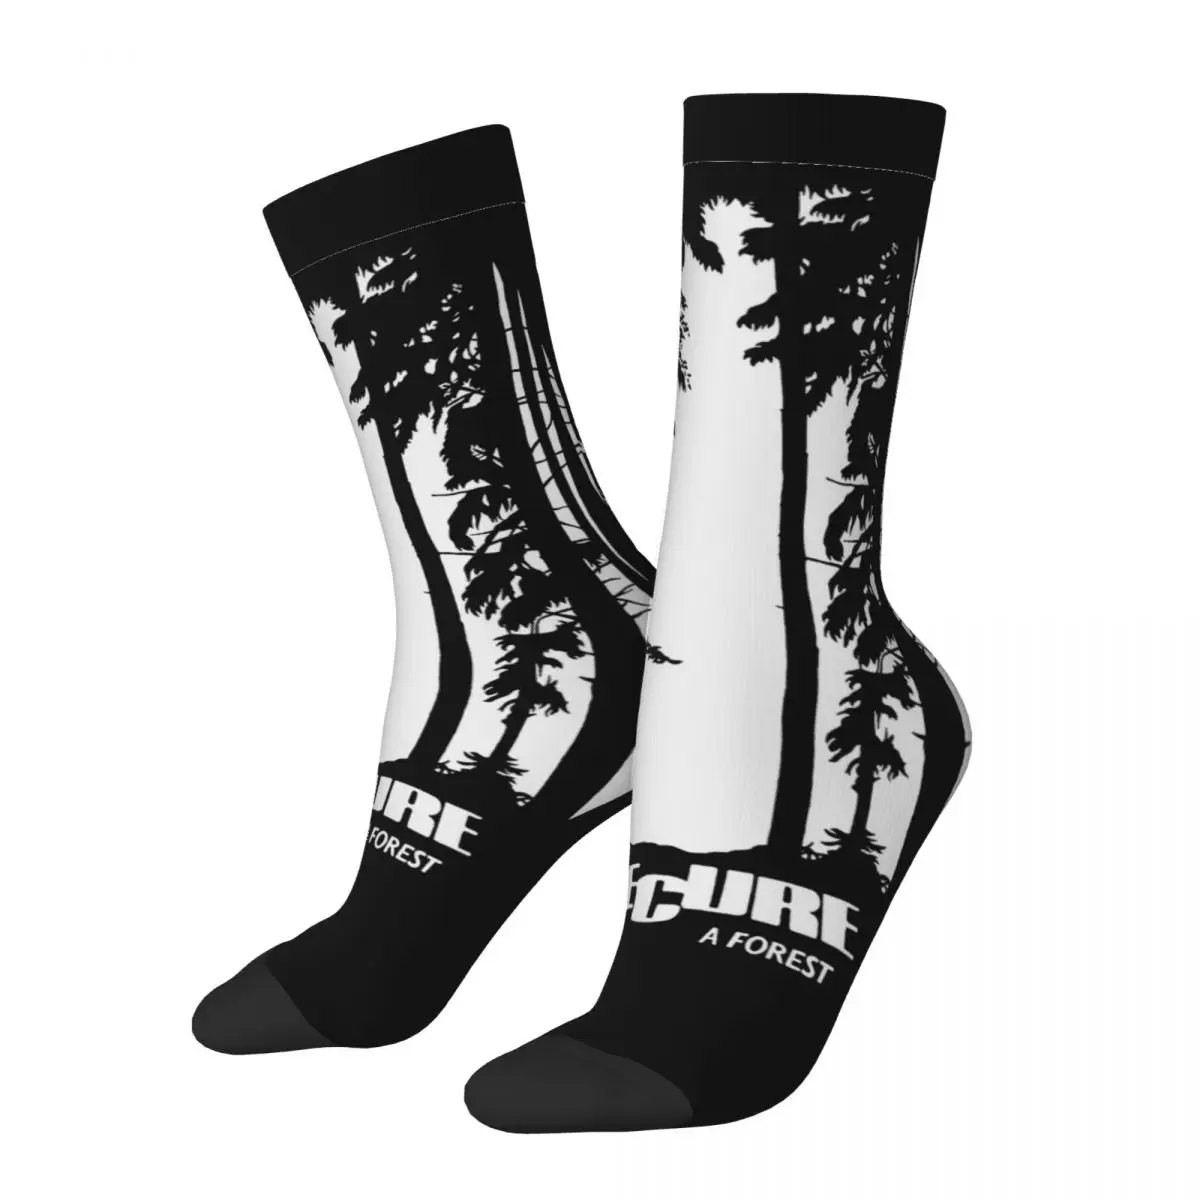 

The Cure A Forest Vintage Socks Men's Women's Polyester Funny Happy Robert Smith Socks Hip Hop Middle Tube Stockings Gifts